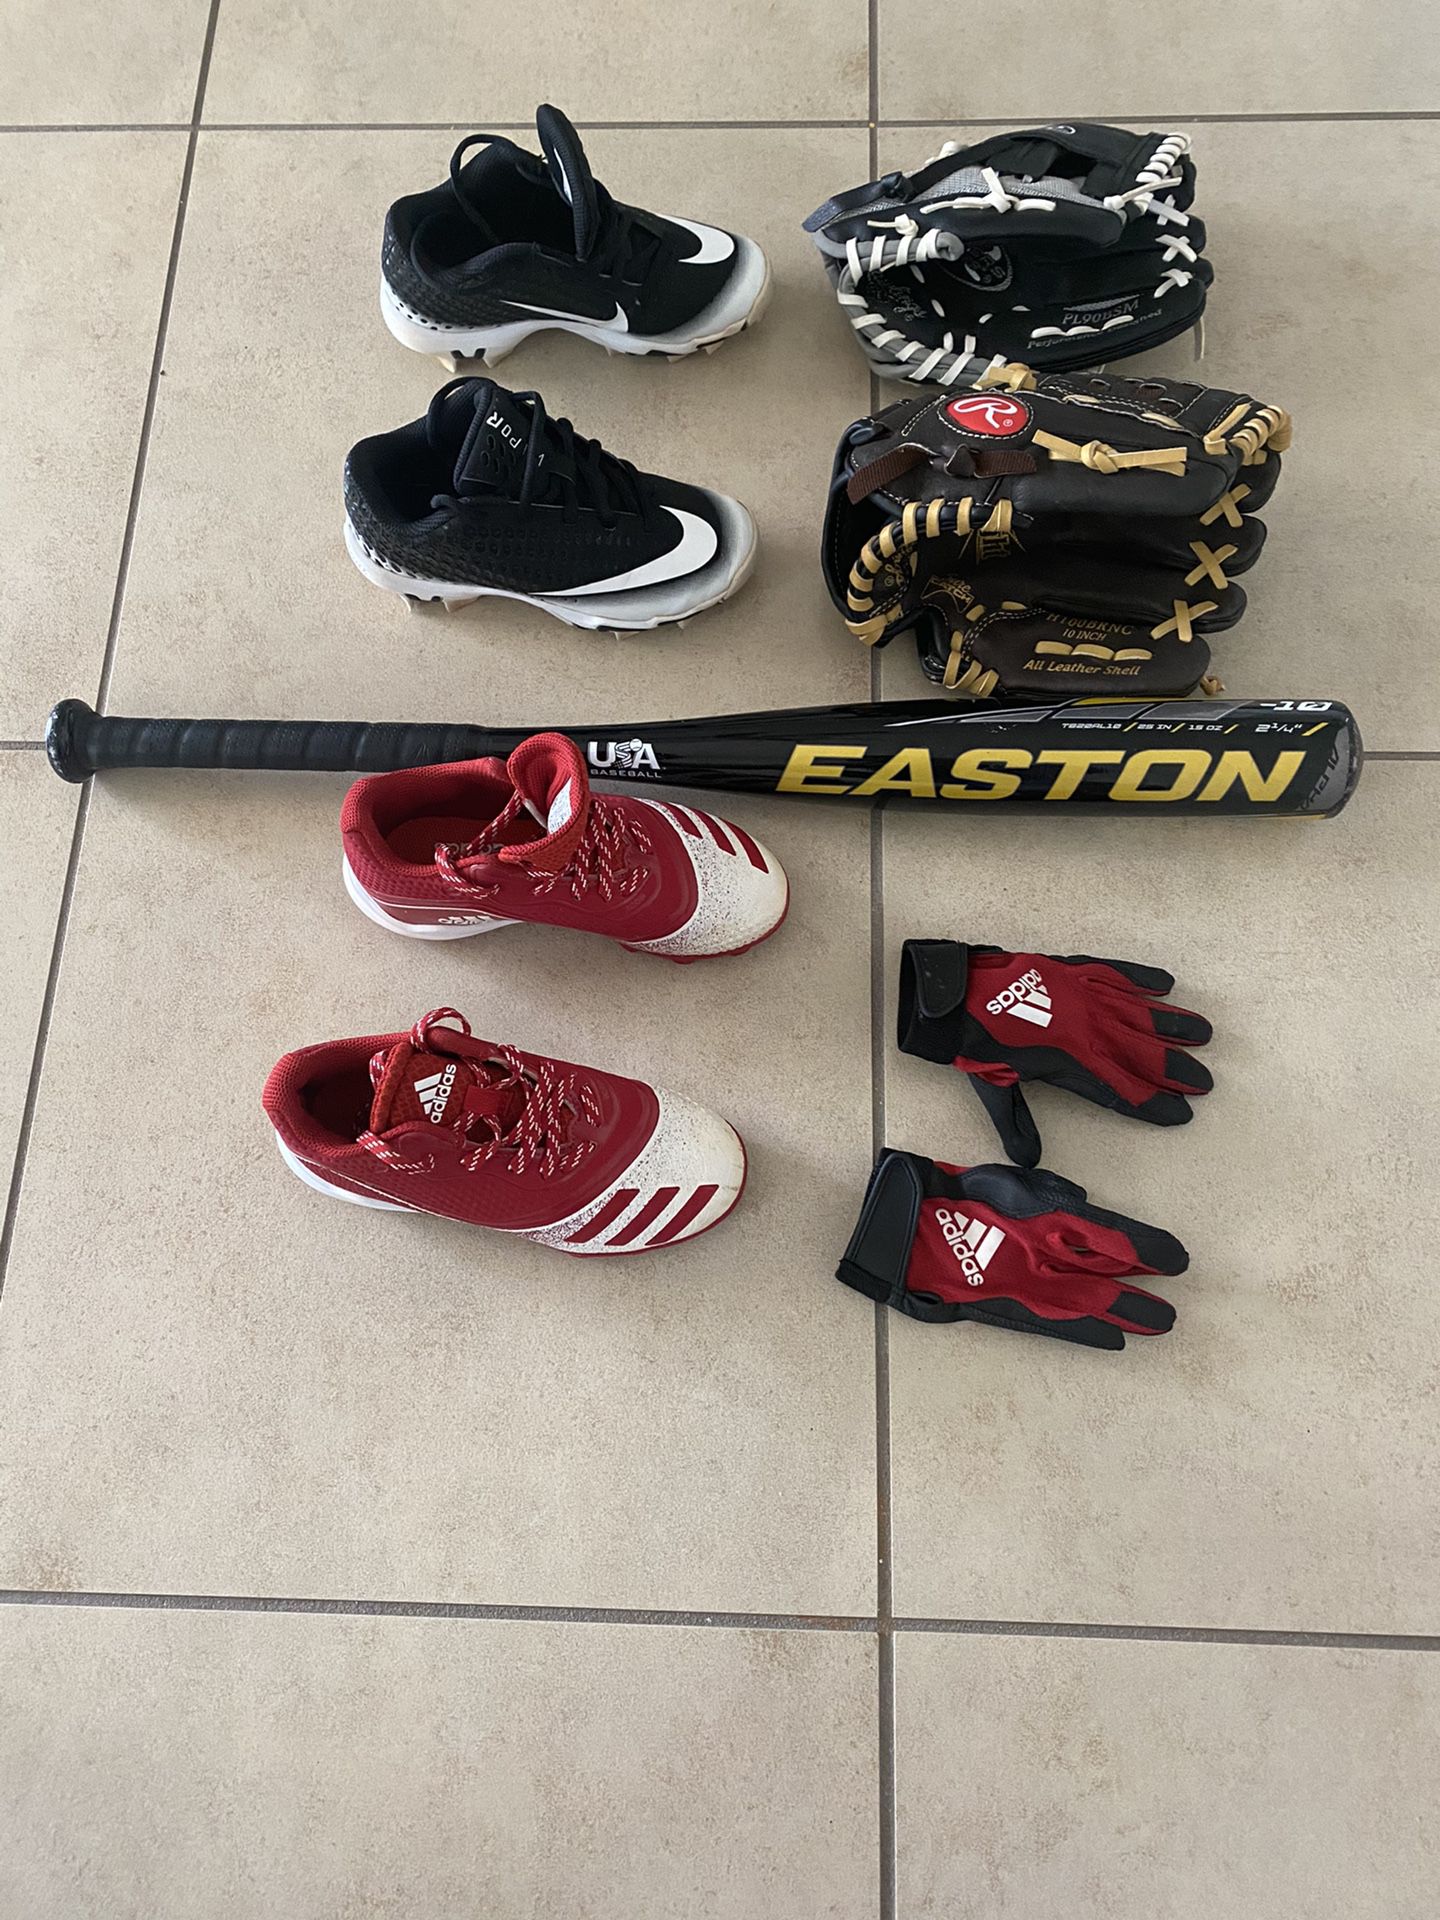 Baseball shoes, gloves and bat for kid